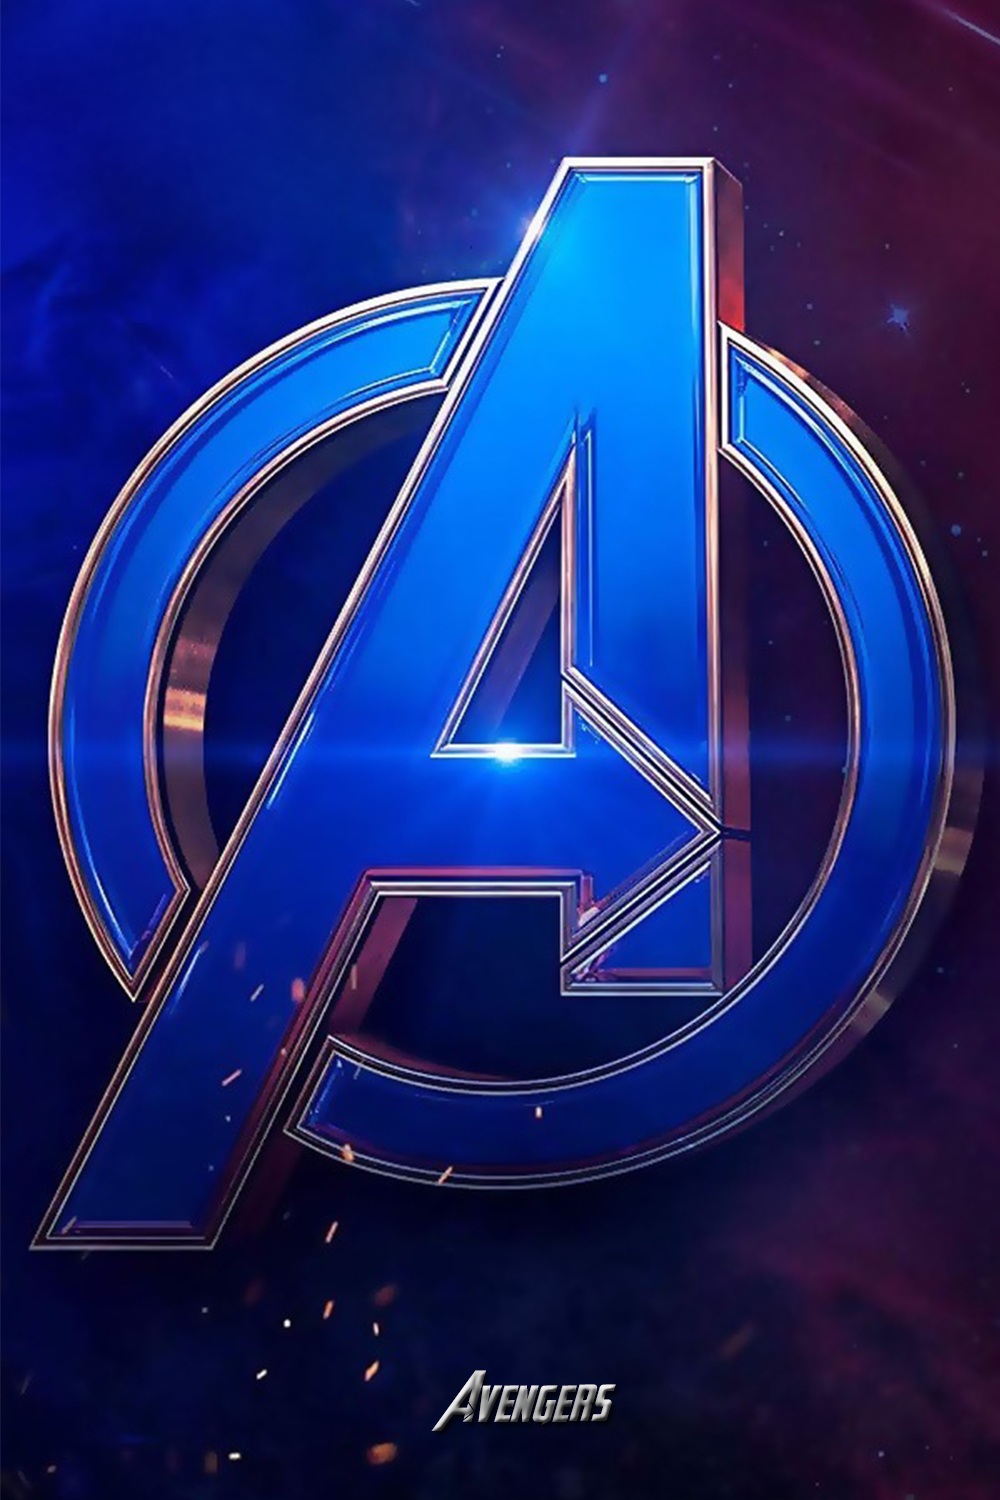 Avengers Wallpaper for Mobile HD Free Download. Avengers wallpaper, Marvel wallpaper hd, Avengers logo